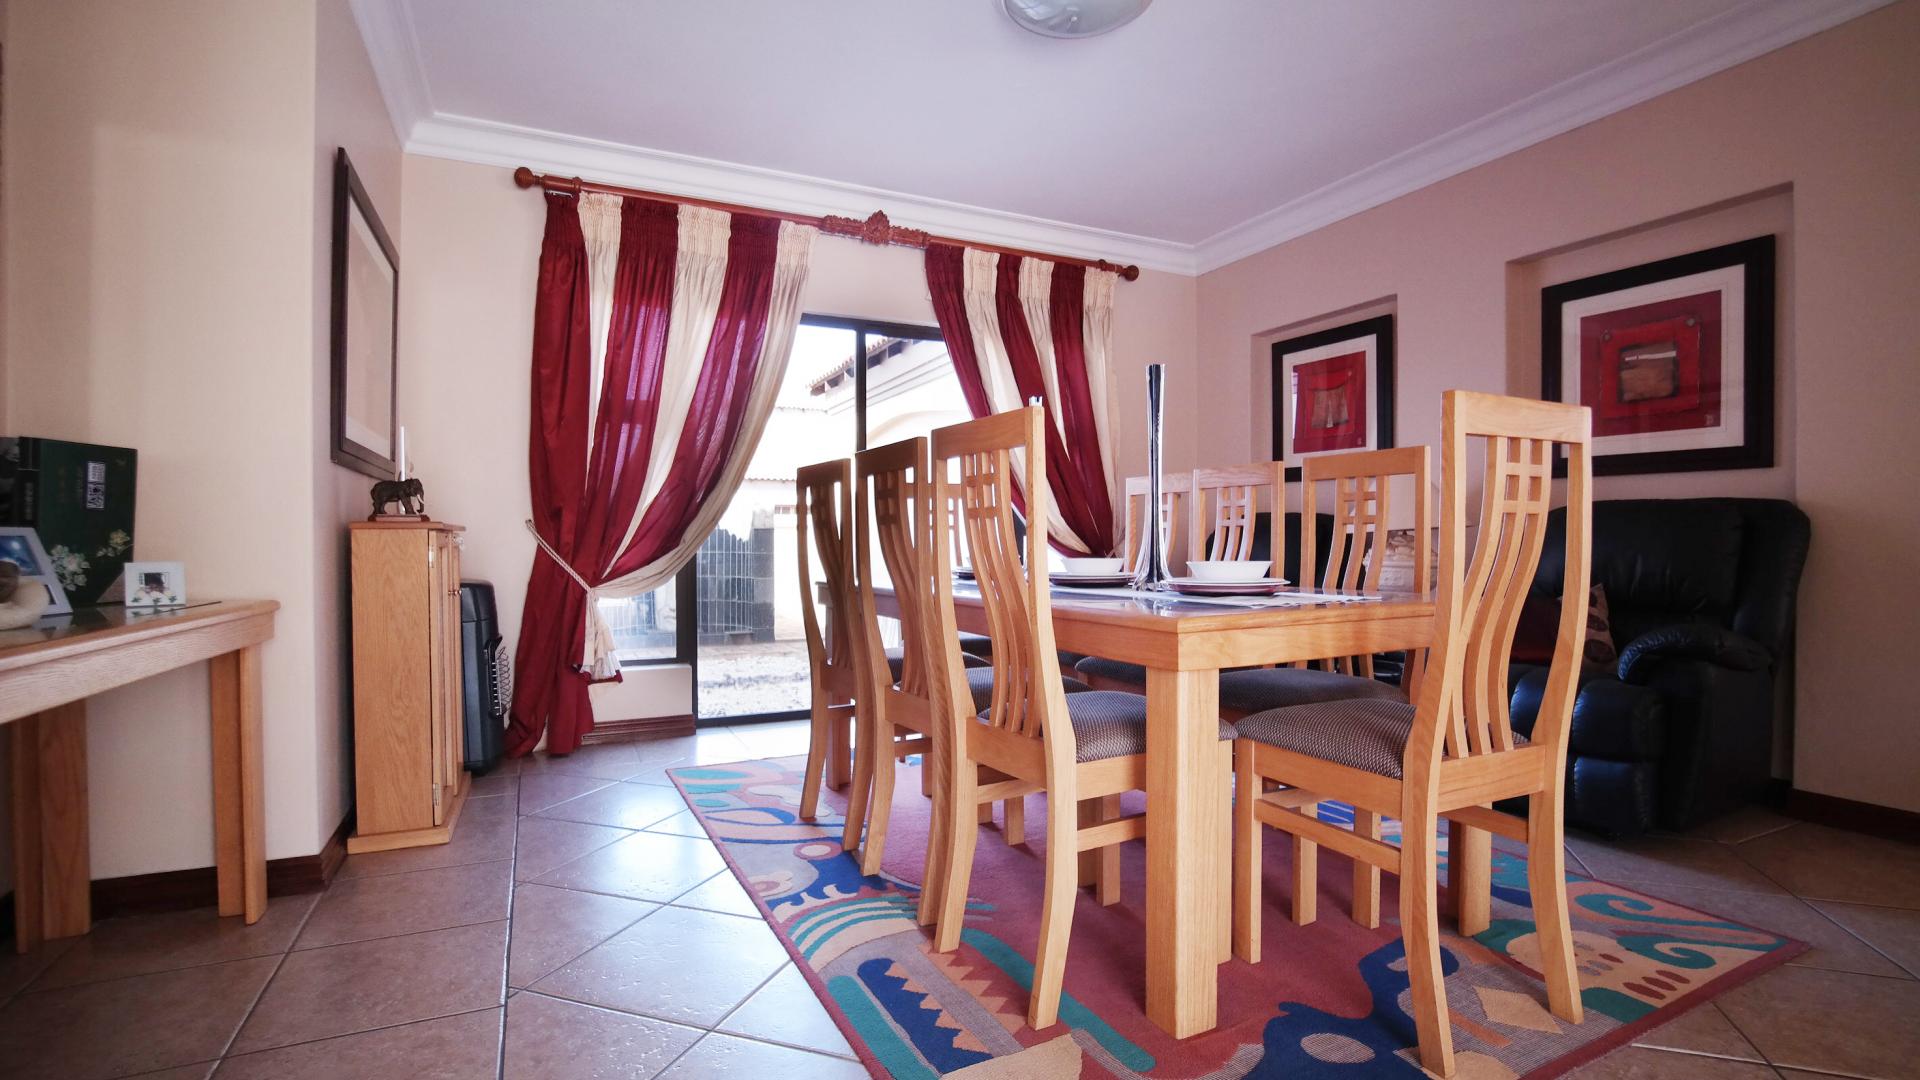 Dining Room - 24 square meters of property in Irene Farm Villages